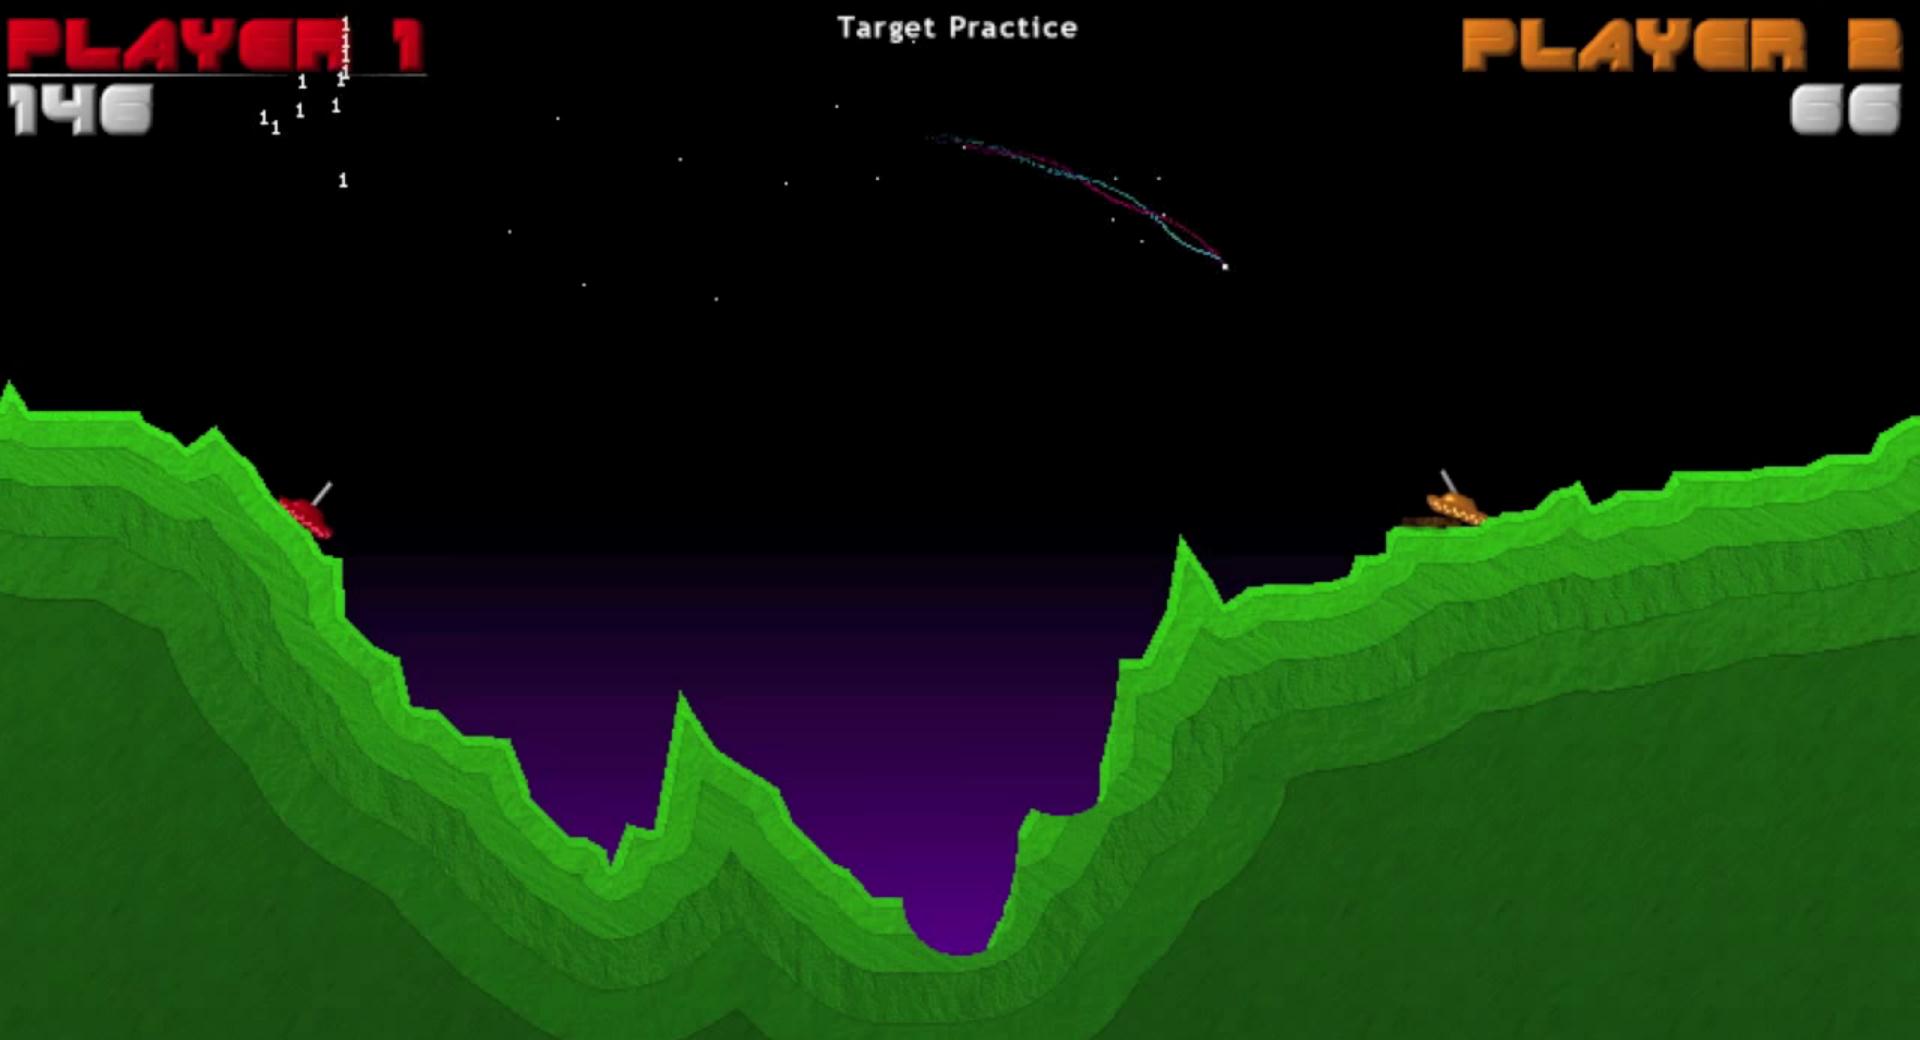 pocket tanks deluxe new version free download